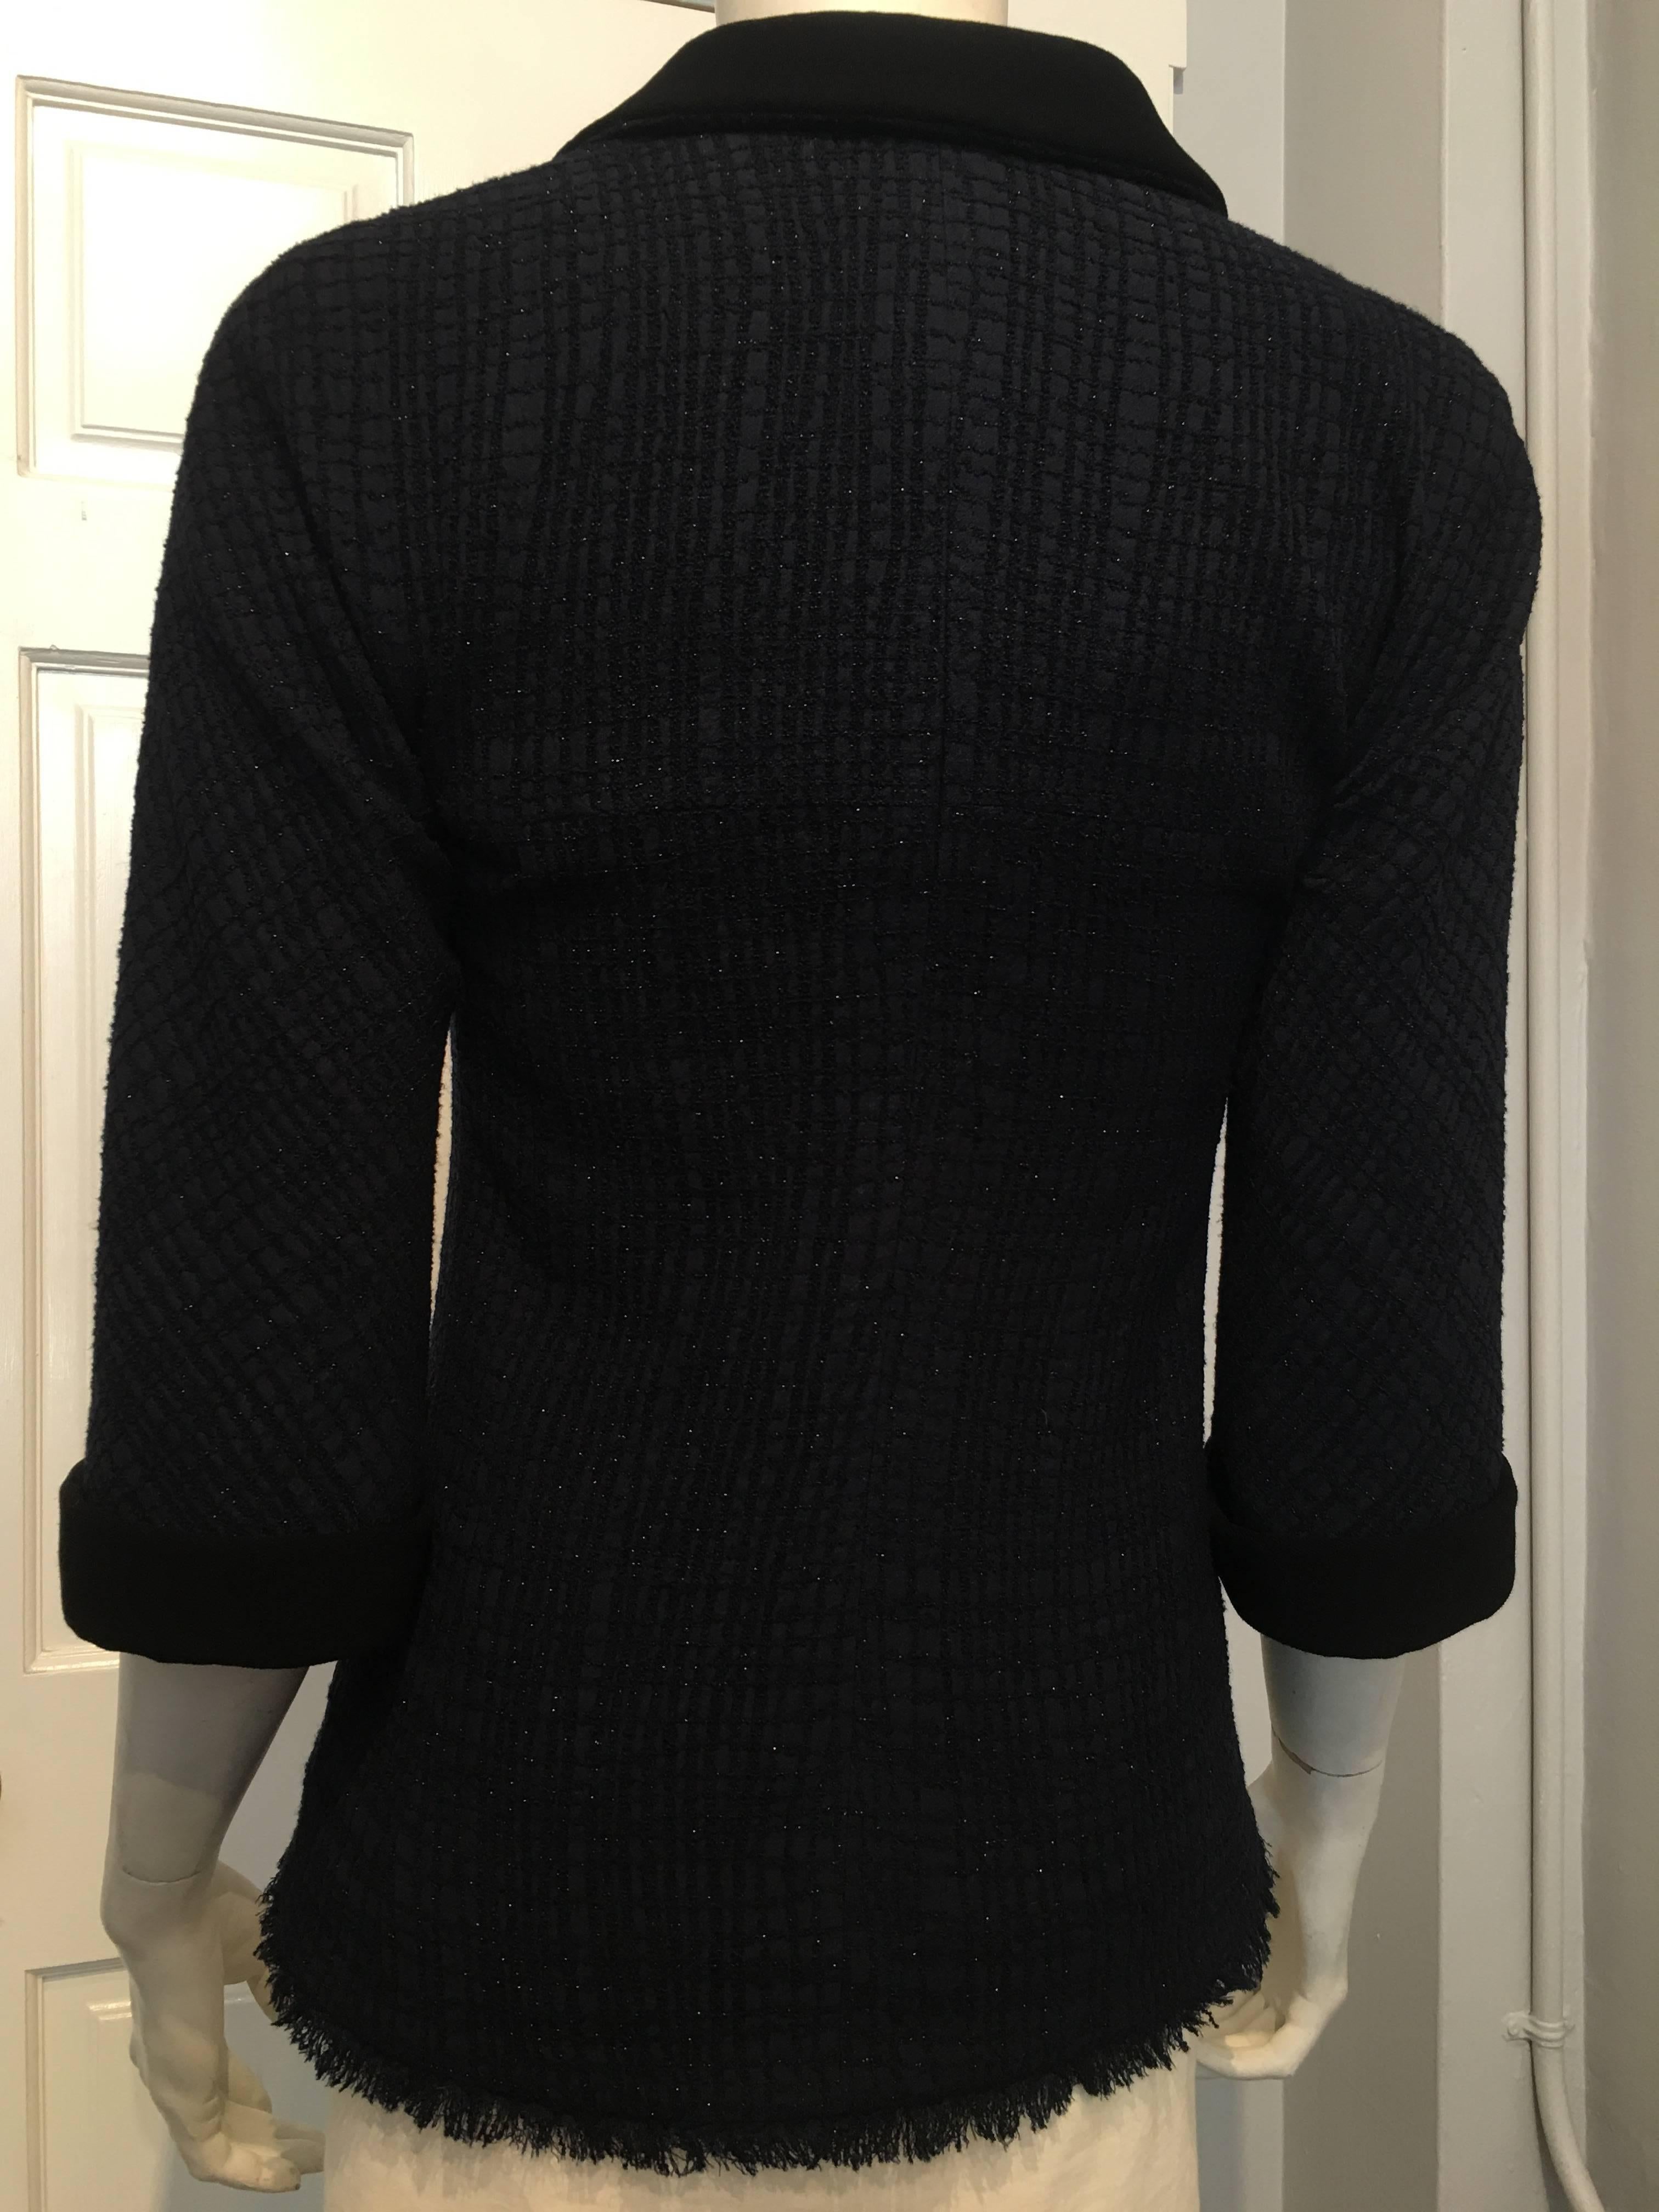 Women's Chanel Navy and Black Sparkly Jacket size 34 (2)